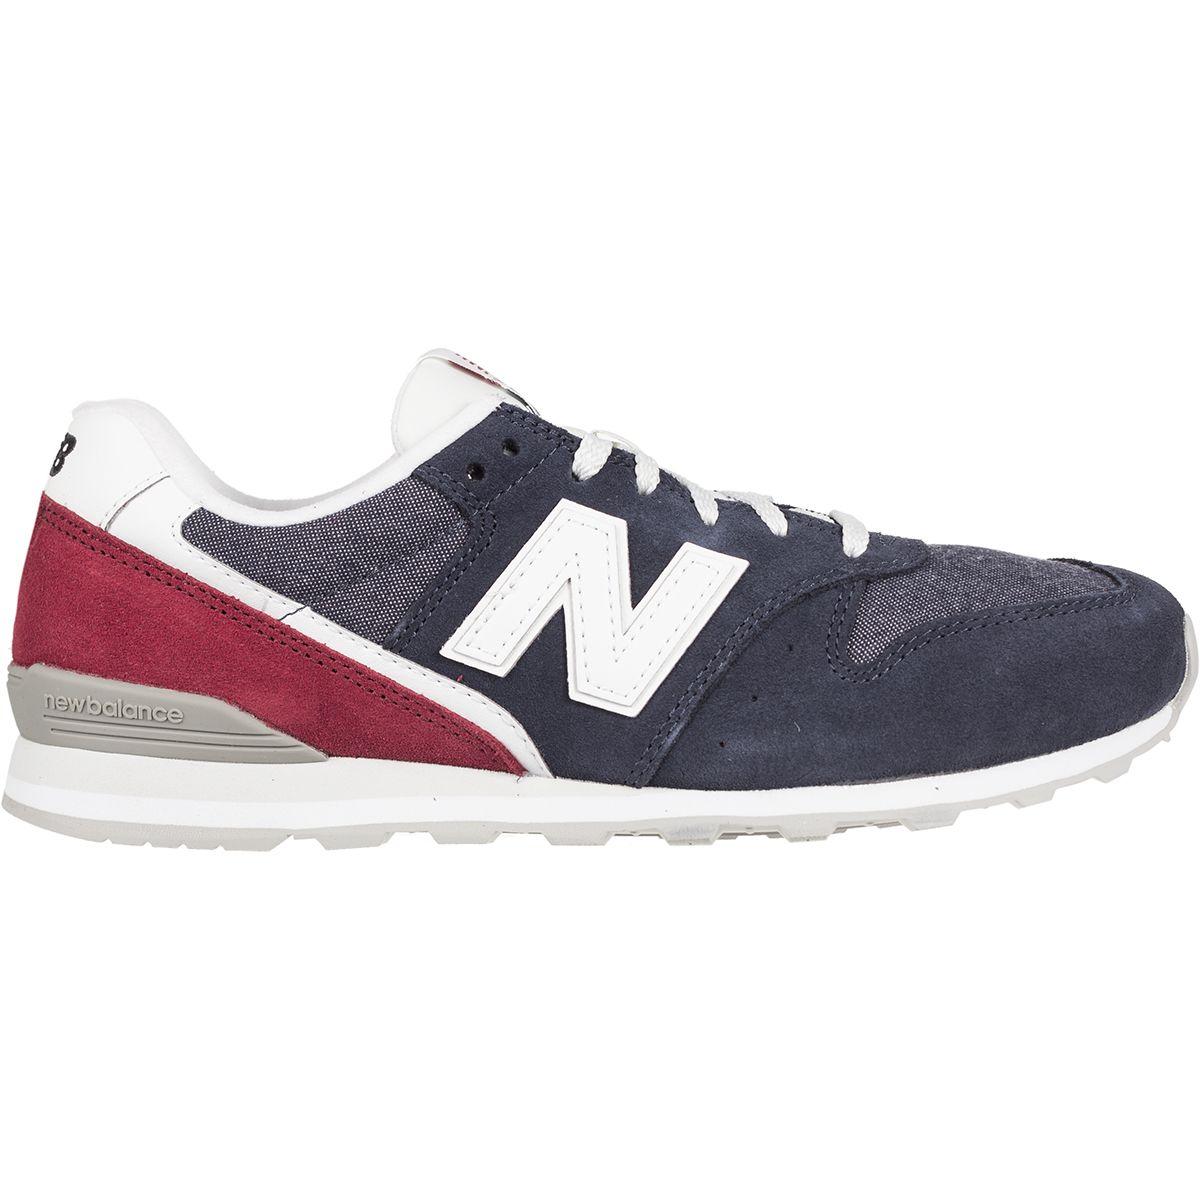 New Balance Suede 996 Shoe in Blue - Lyst